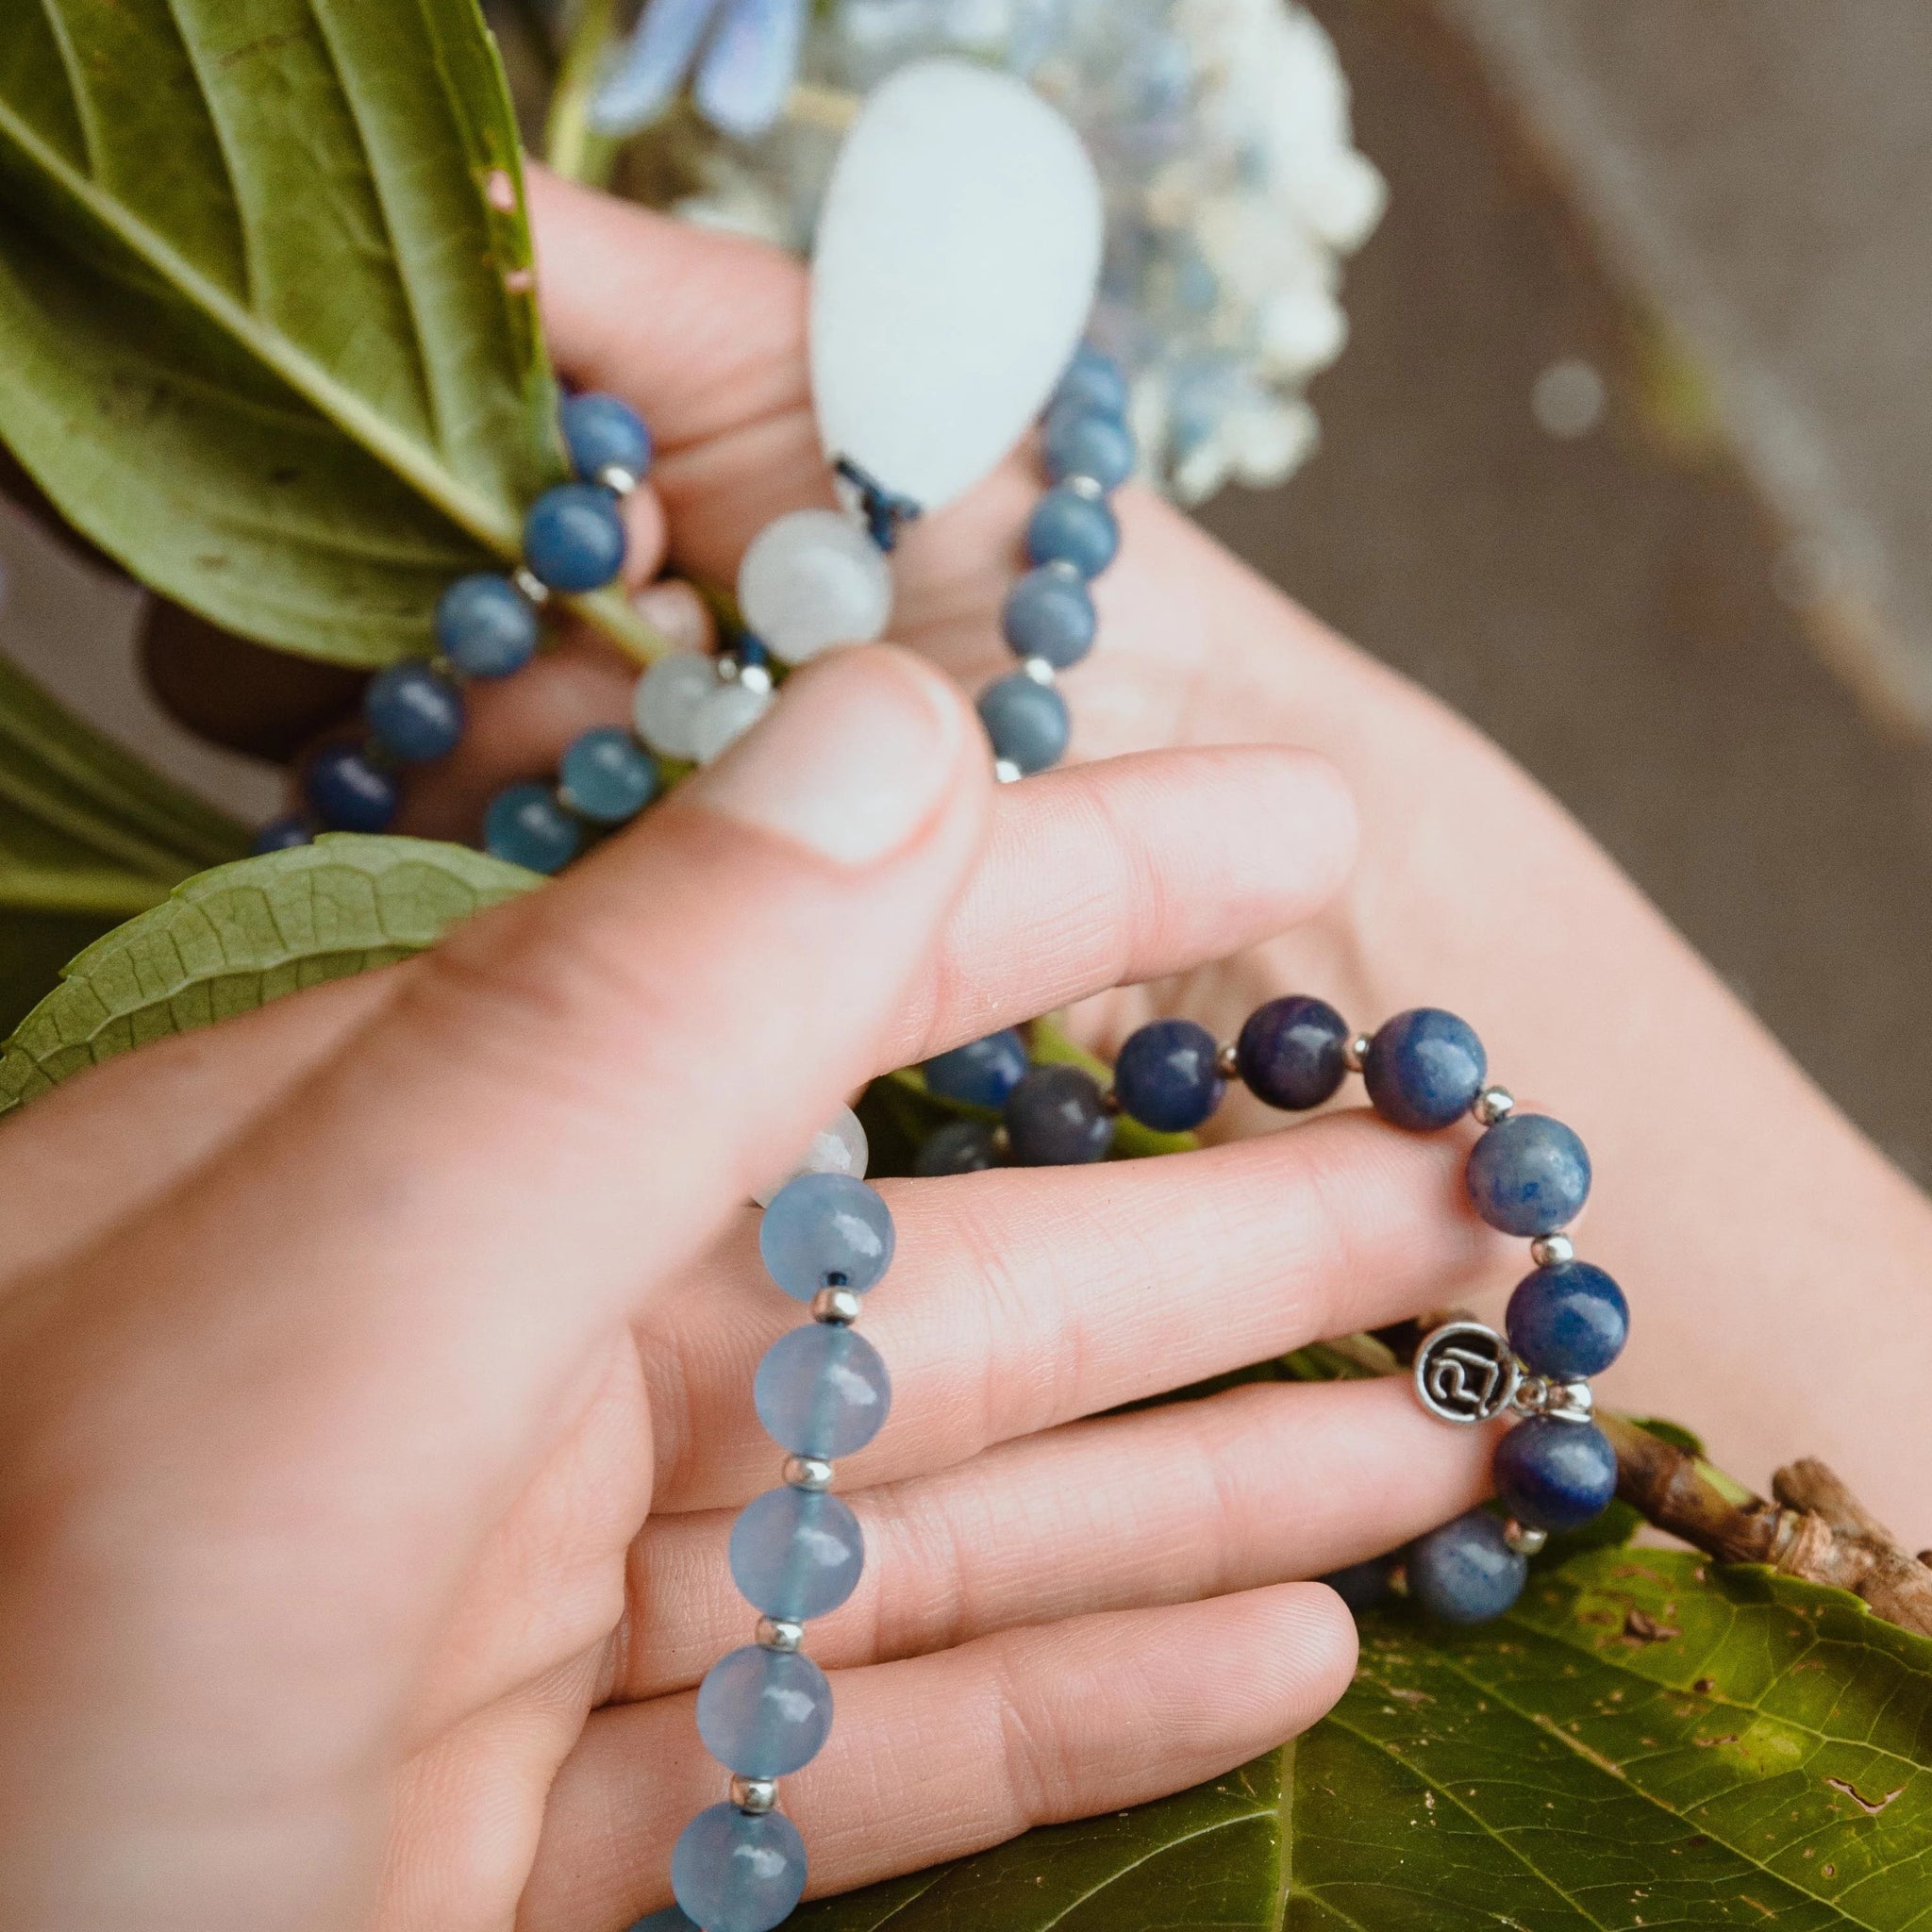 Discover Mala Necklace.